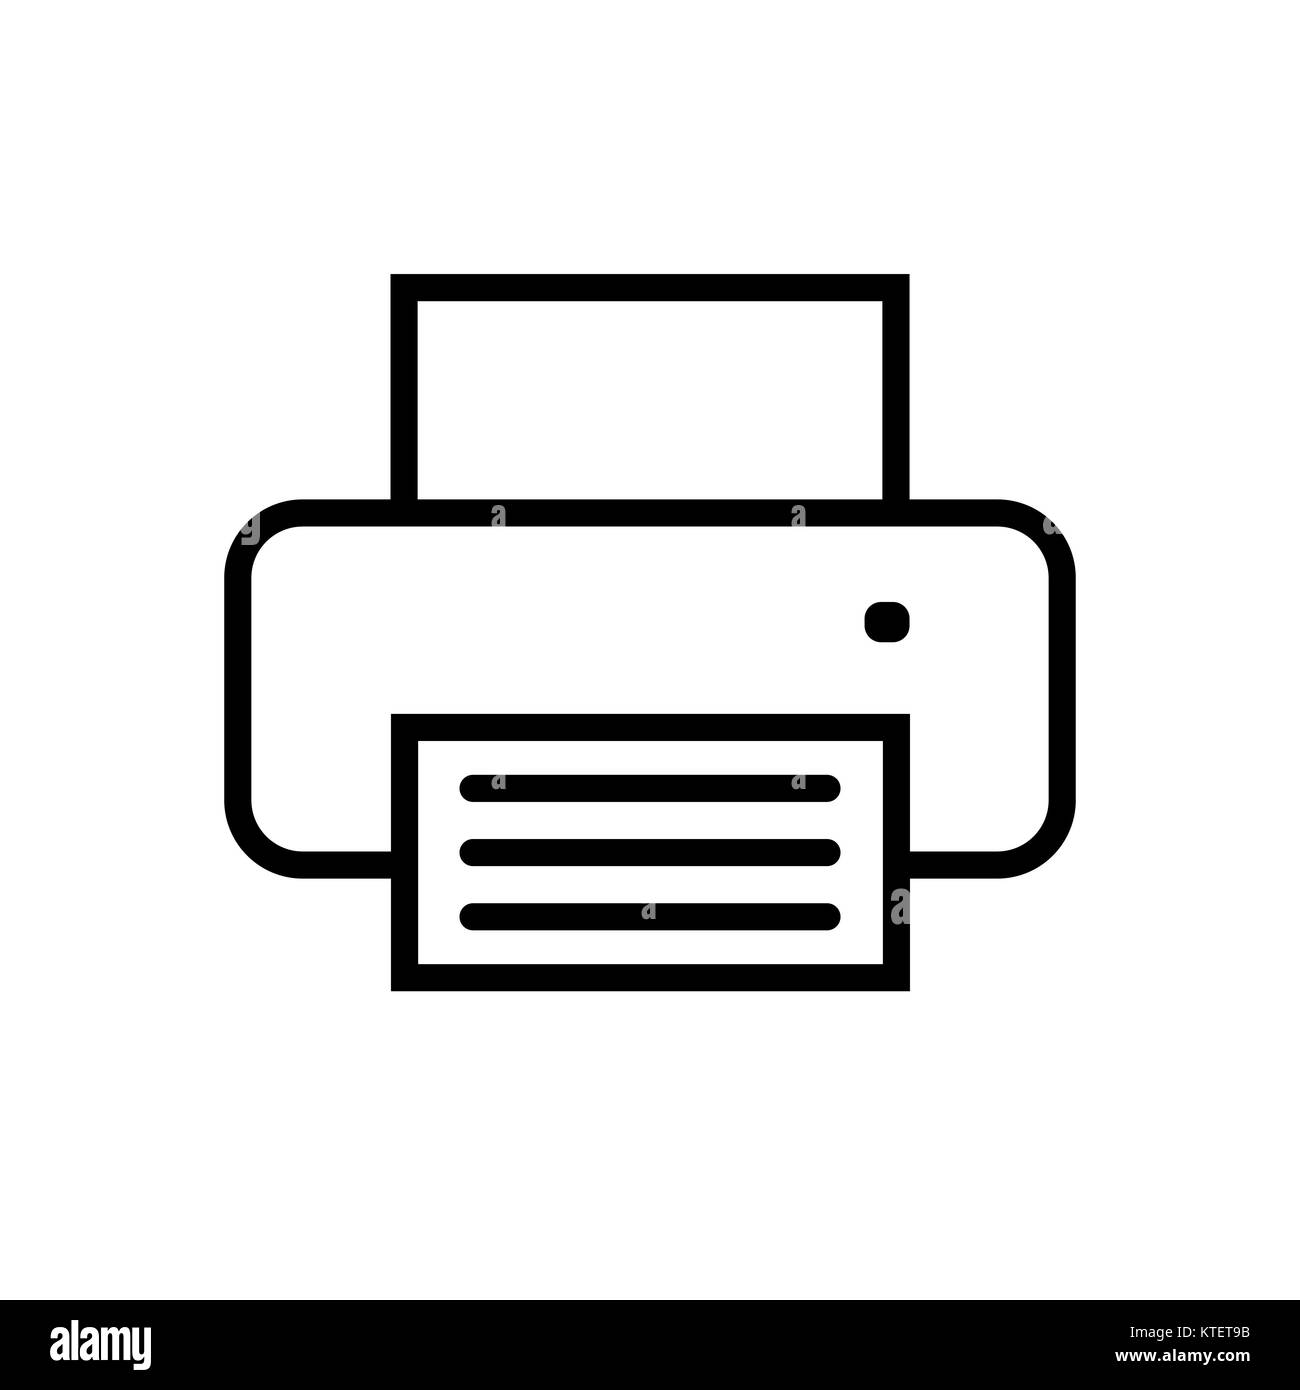 Printer icon in flat style. Stock Vector